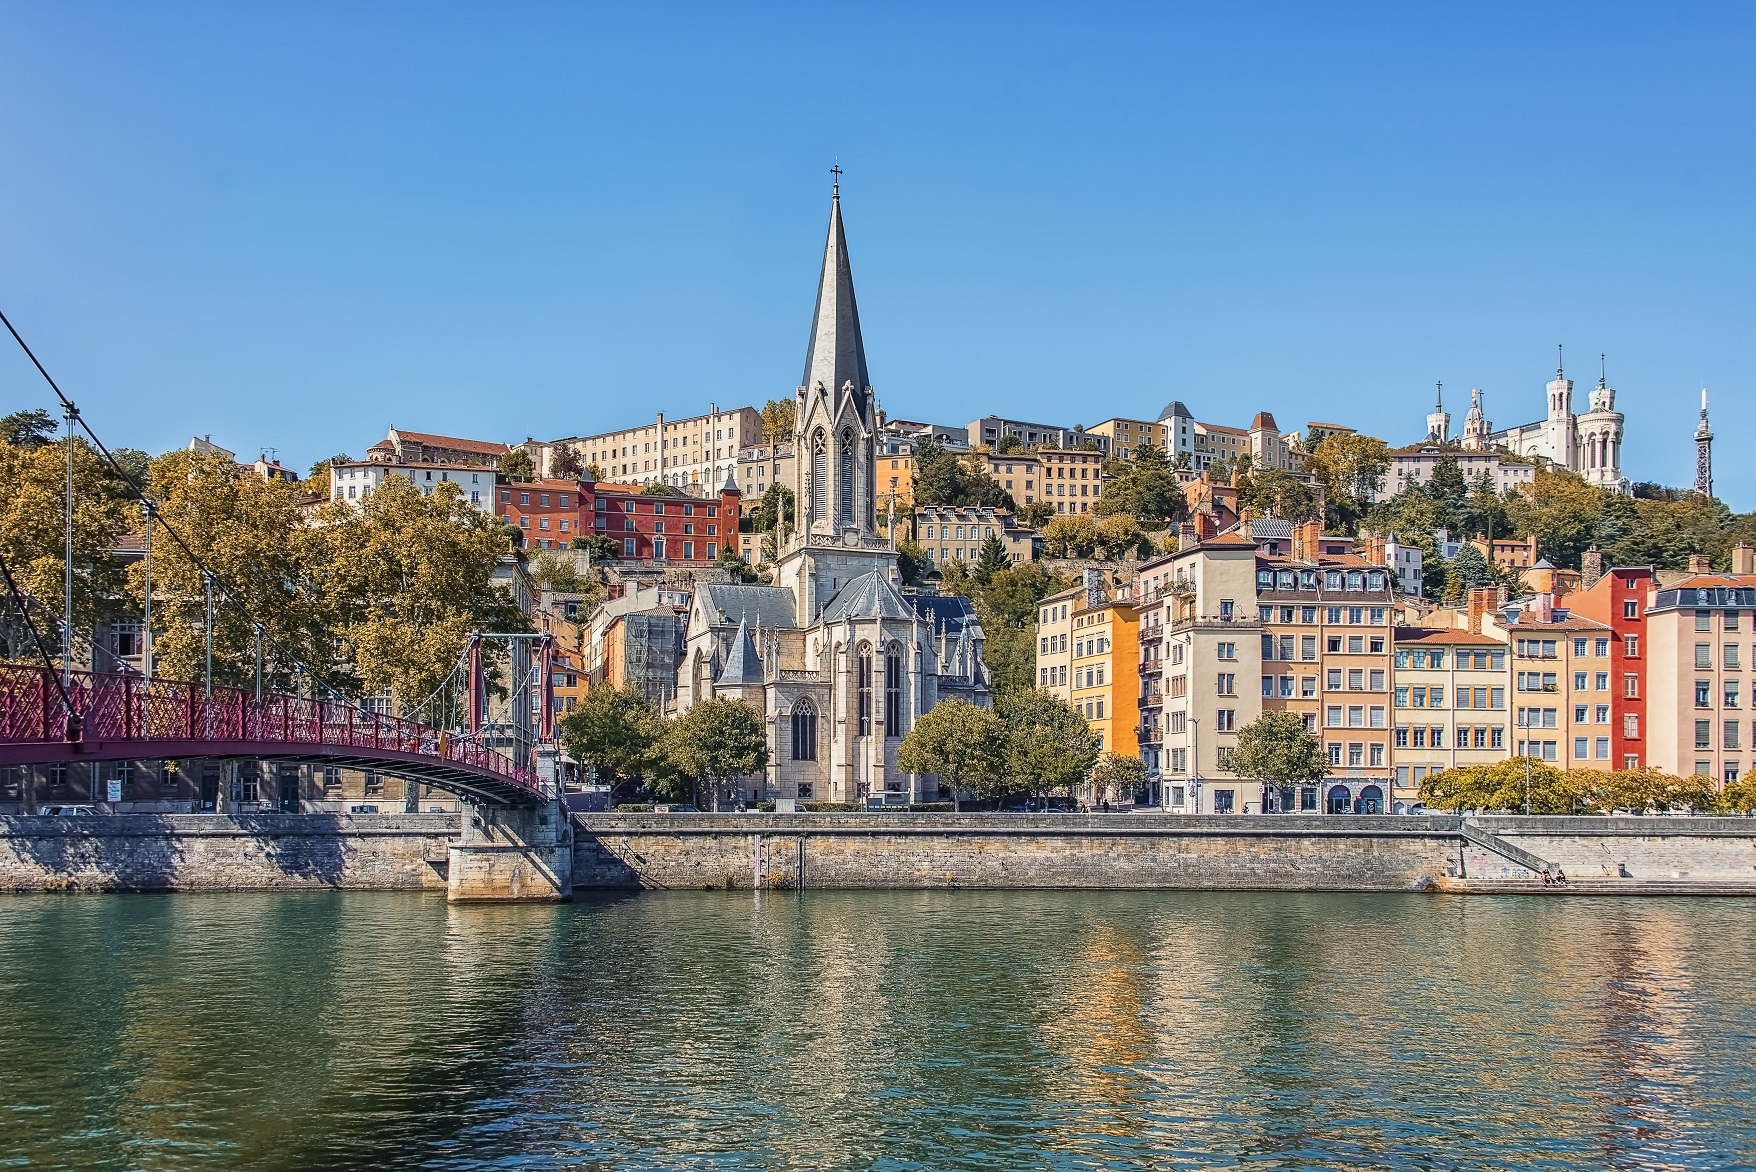 World PM2022 takes place from 9-13 October 2022 in Lyon, France.